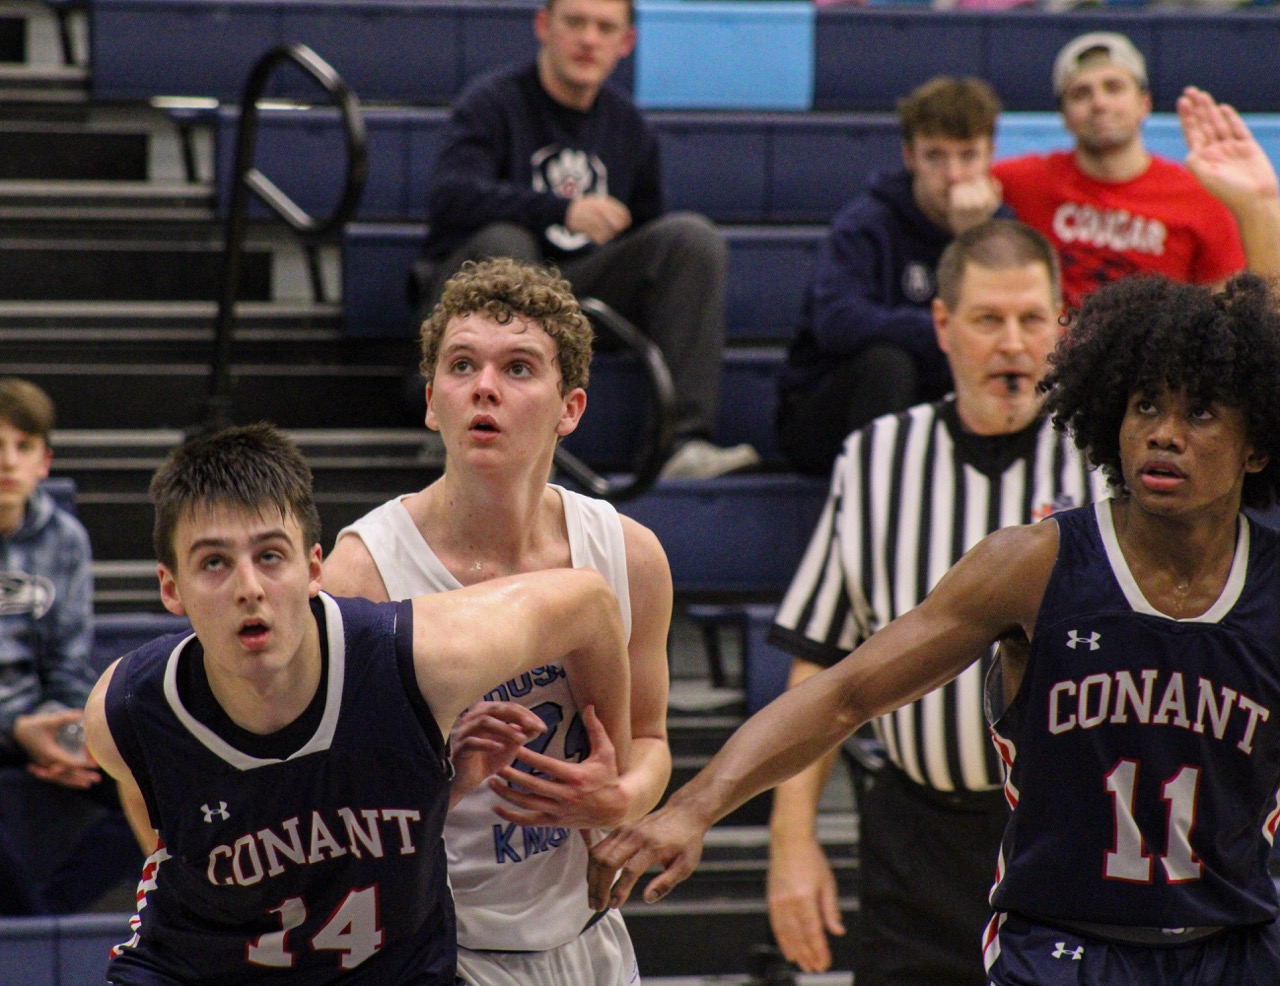 Senior Charlie Gilmer goes for rebound after Conant free throw. (All photos by Bella Brouilette)